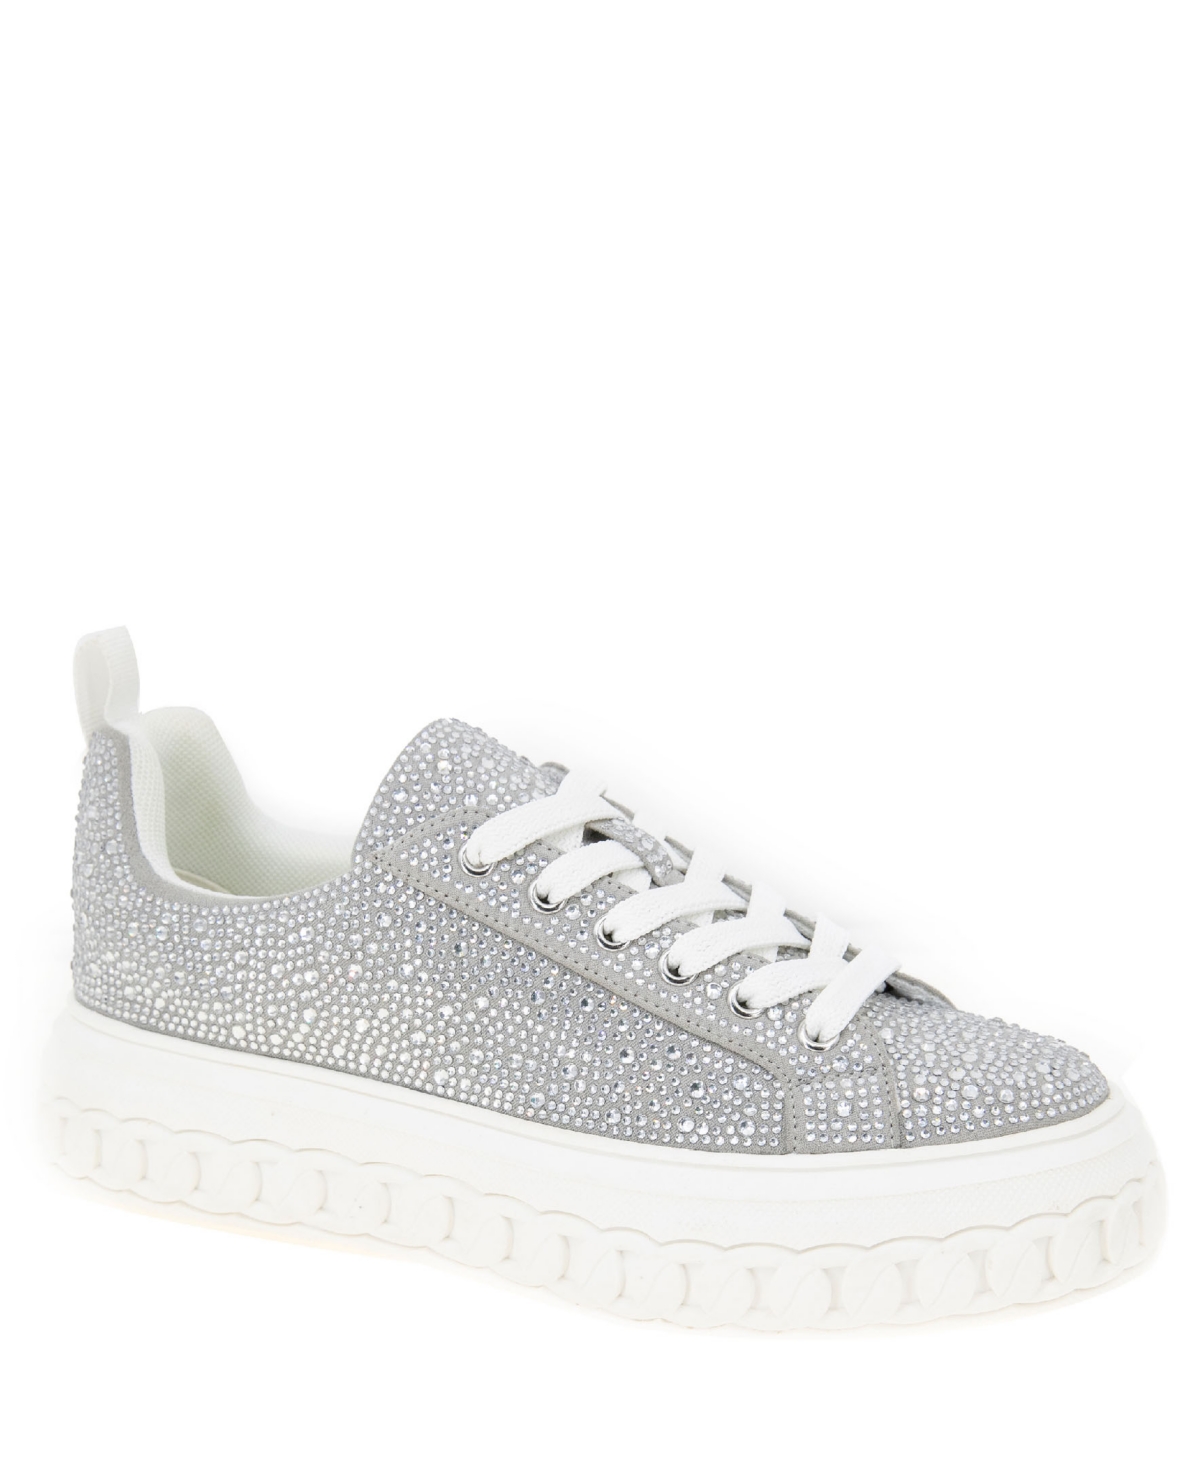 Bcbgeneration Women's Riso Lace-up Platform Sneakers In Silver Rhinestones